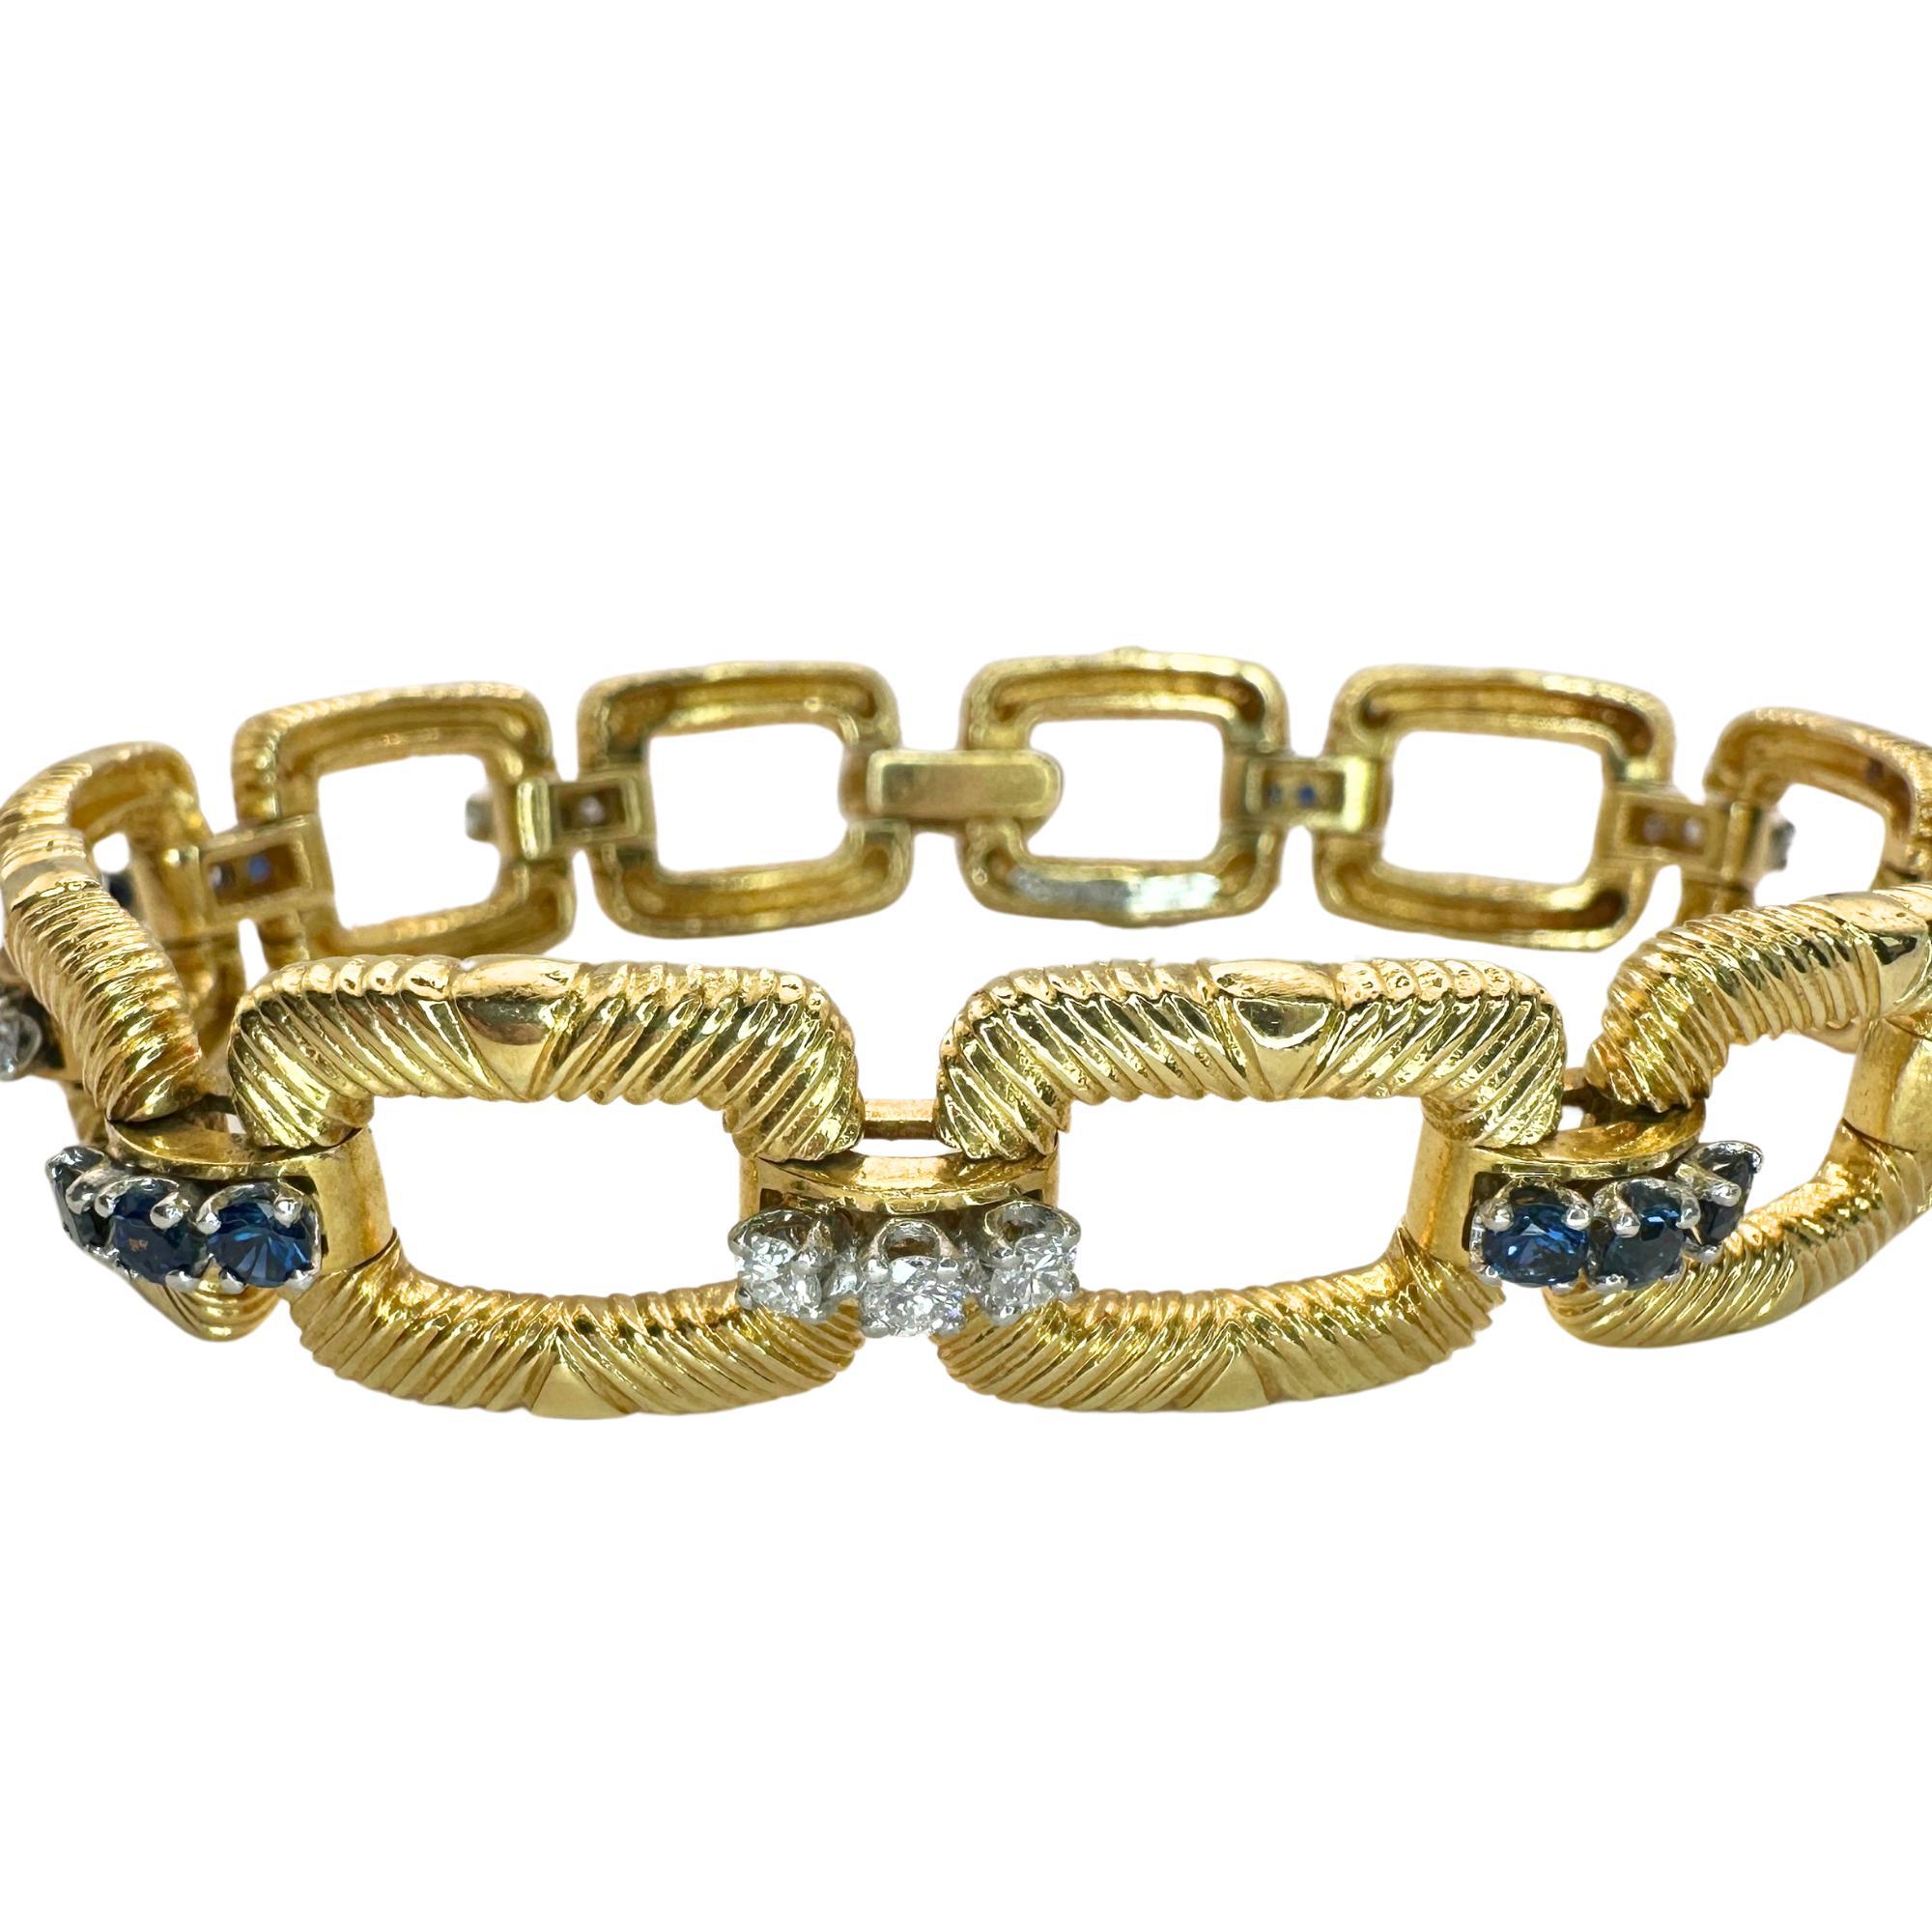 Indulge in luxury and timeless elegance with this exquisite Platinum and 18k Cartier Diamond and Sapphire Bracelet. Featuring approximately 0.75 carats of sparkling diamonds and sapphires, this 1960's piece is marked with 